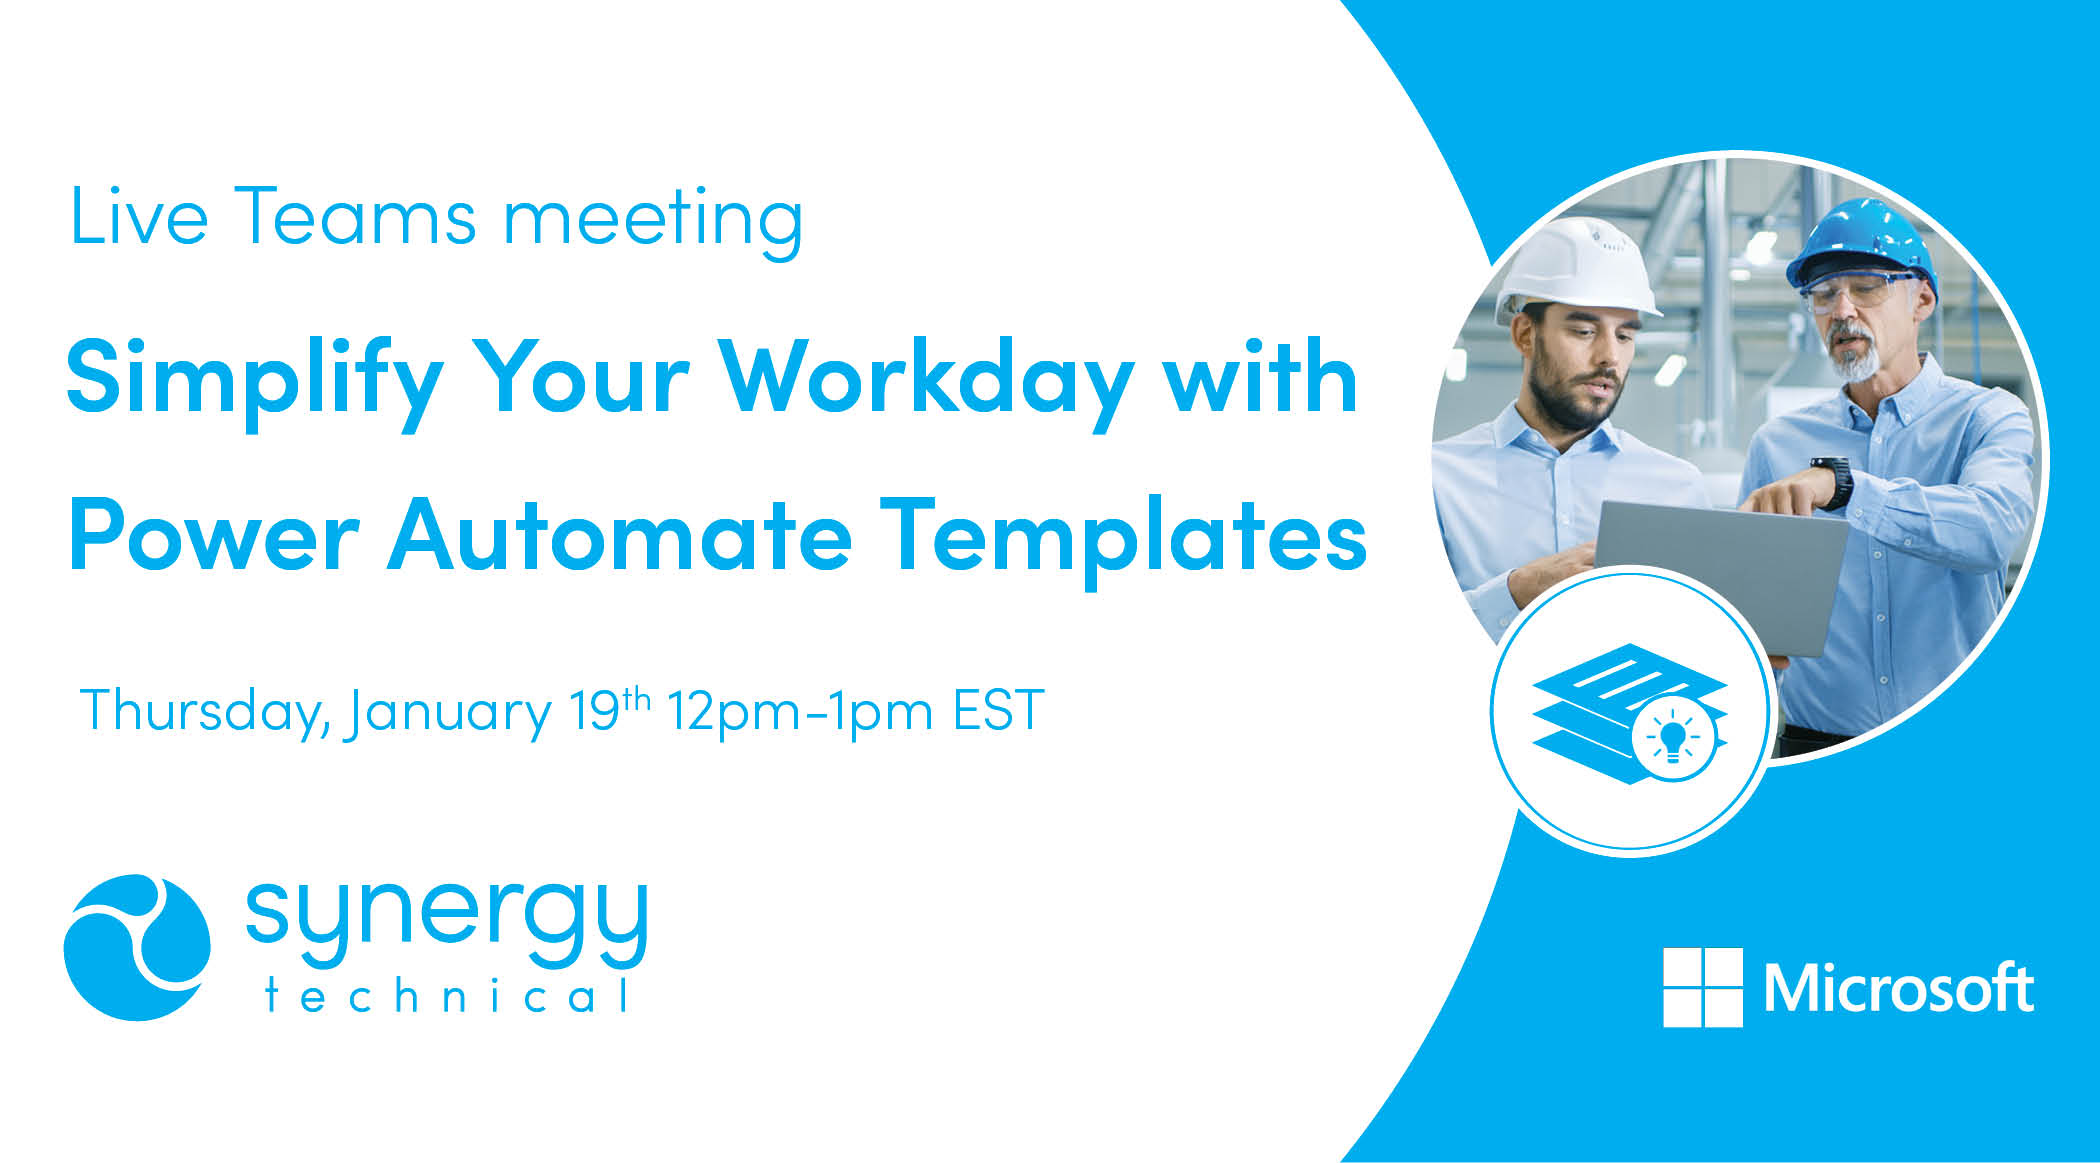 Simplify Your Workday with Power Automate Templates